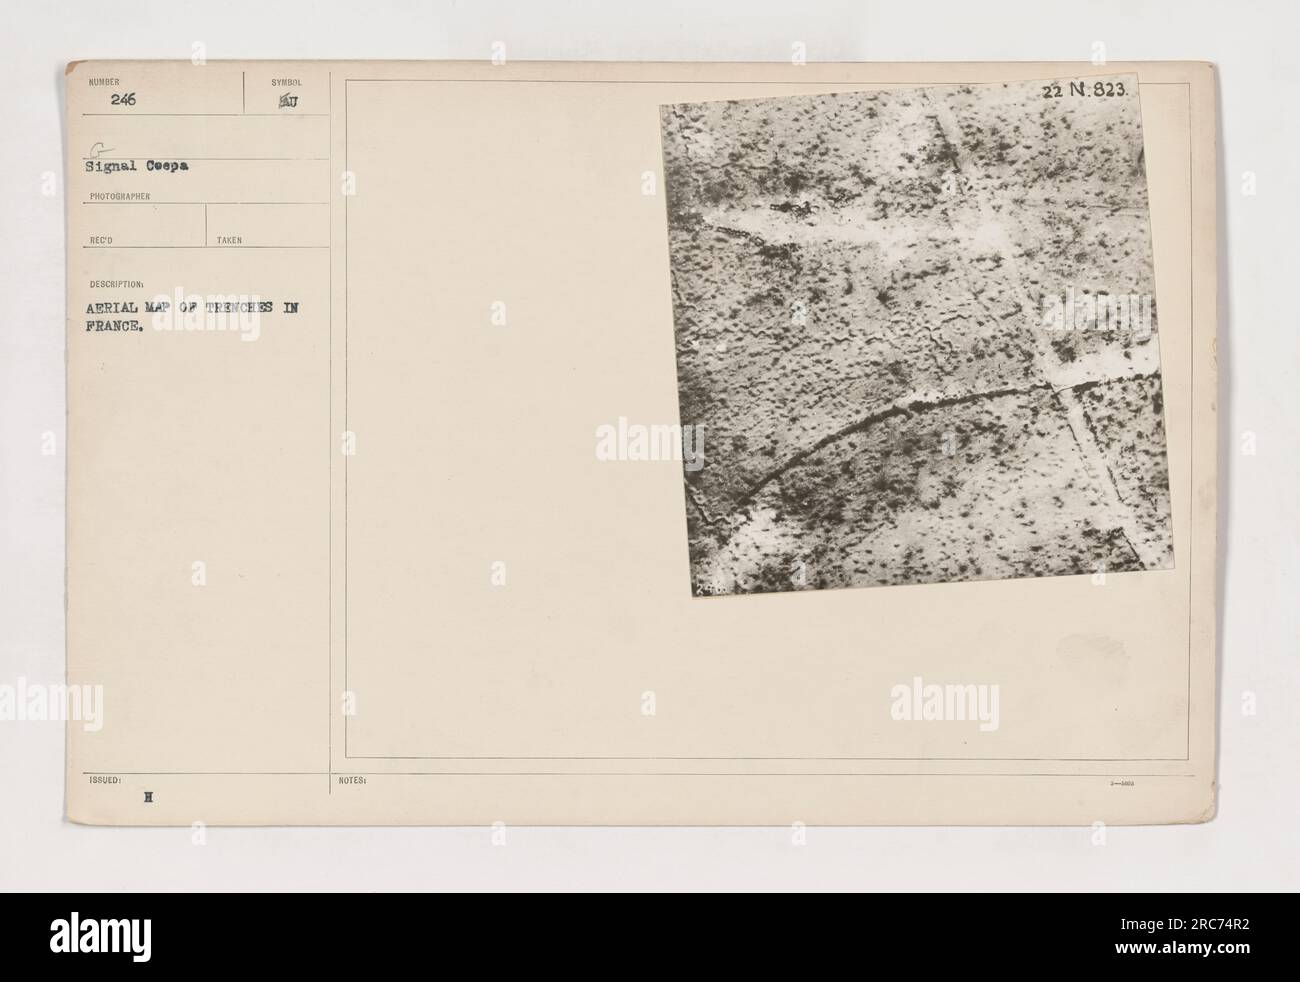 Aerial map showing trenches in France during World War One. Photograph taken by the 246 Signal Company. The map is detailed with symbols, with a note indicating a specific position with N:823 as the coordinates. Stock Photo